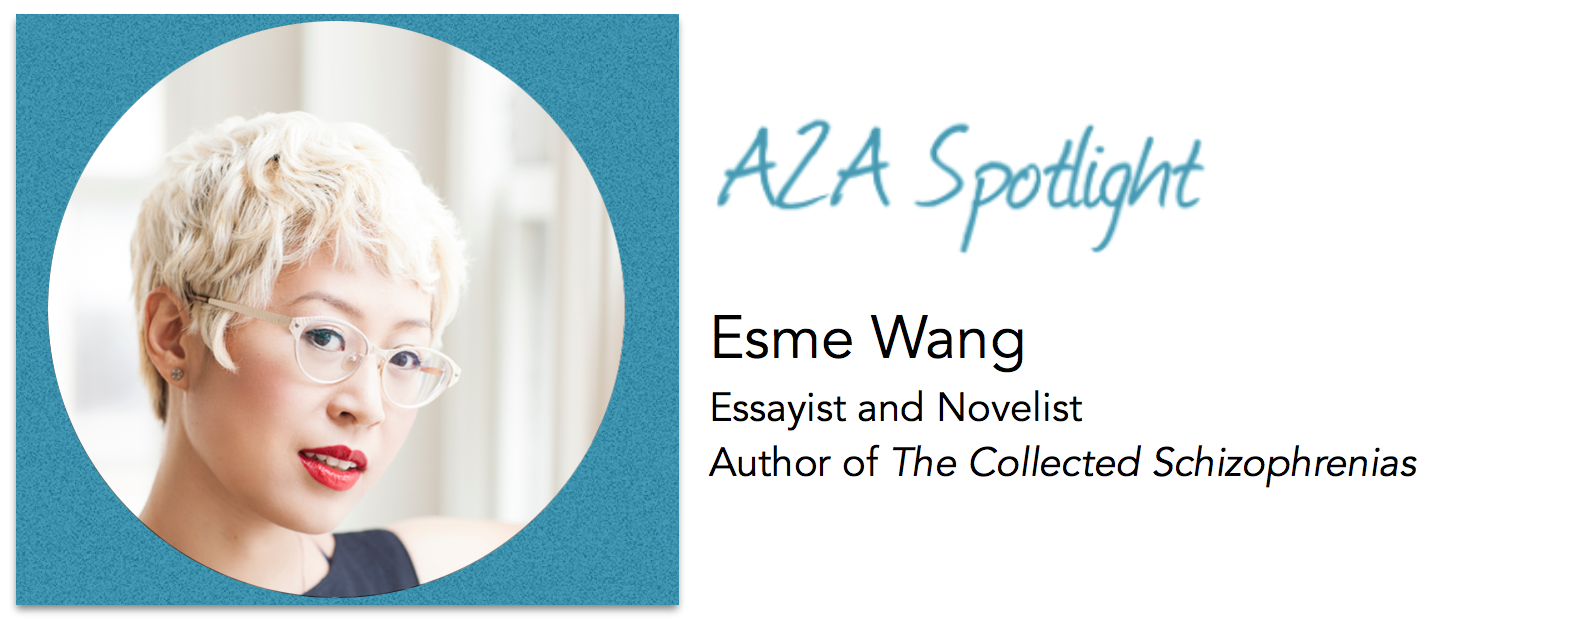 Spotlight – Her Writing Has Helped Author Esme Wang and Others Feel Less Alone